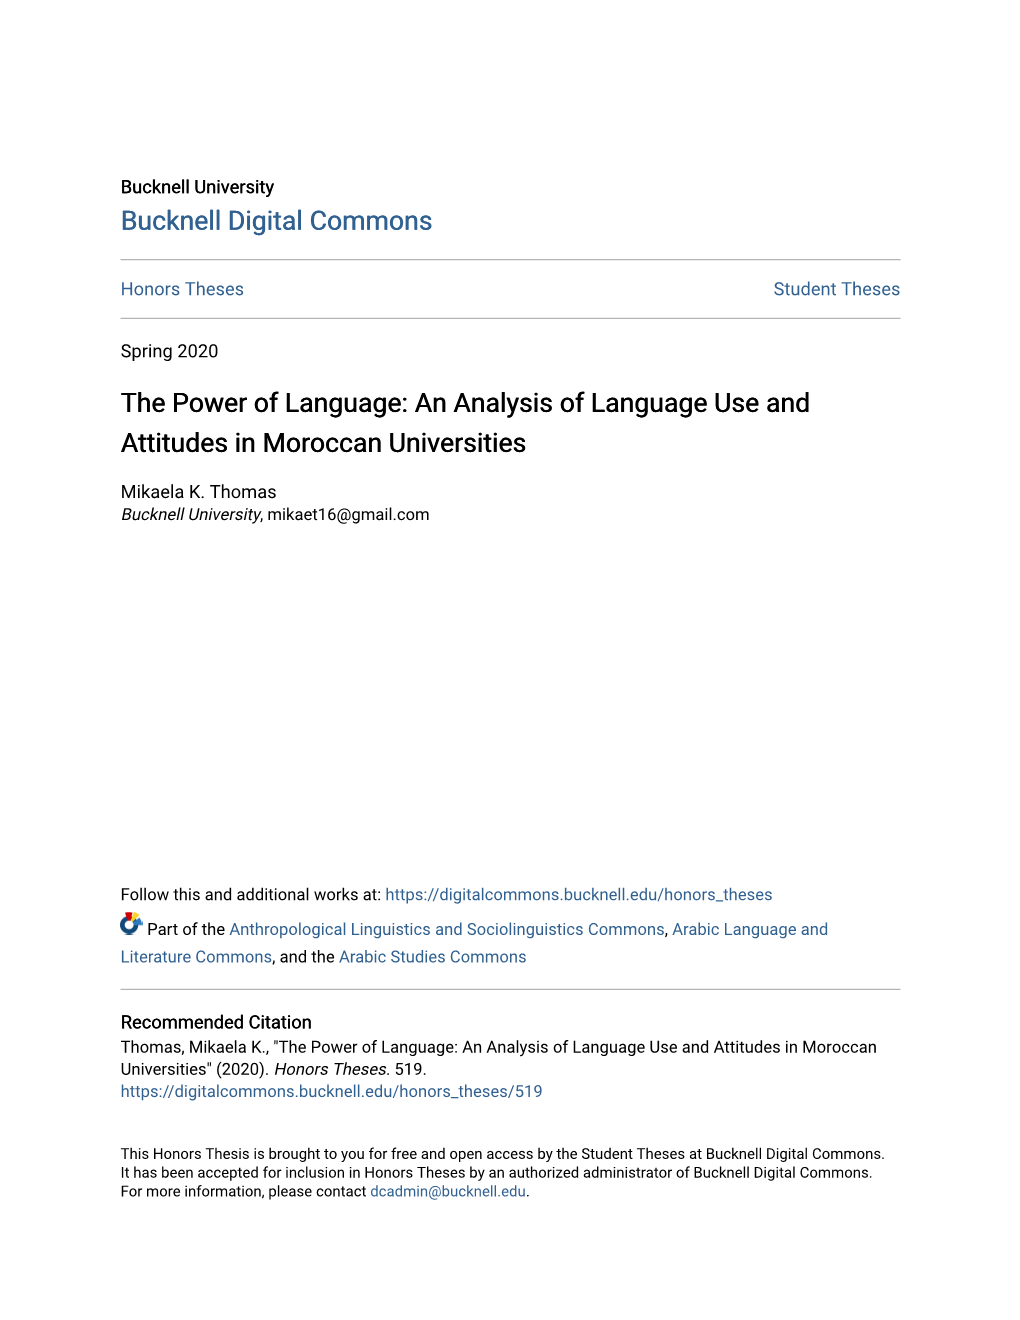 An Analysis of Language Use and Attitudes in Moroccan Universities